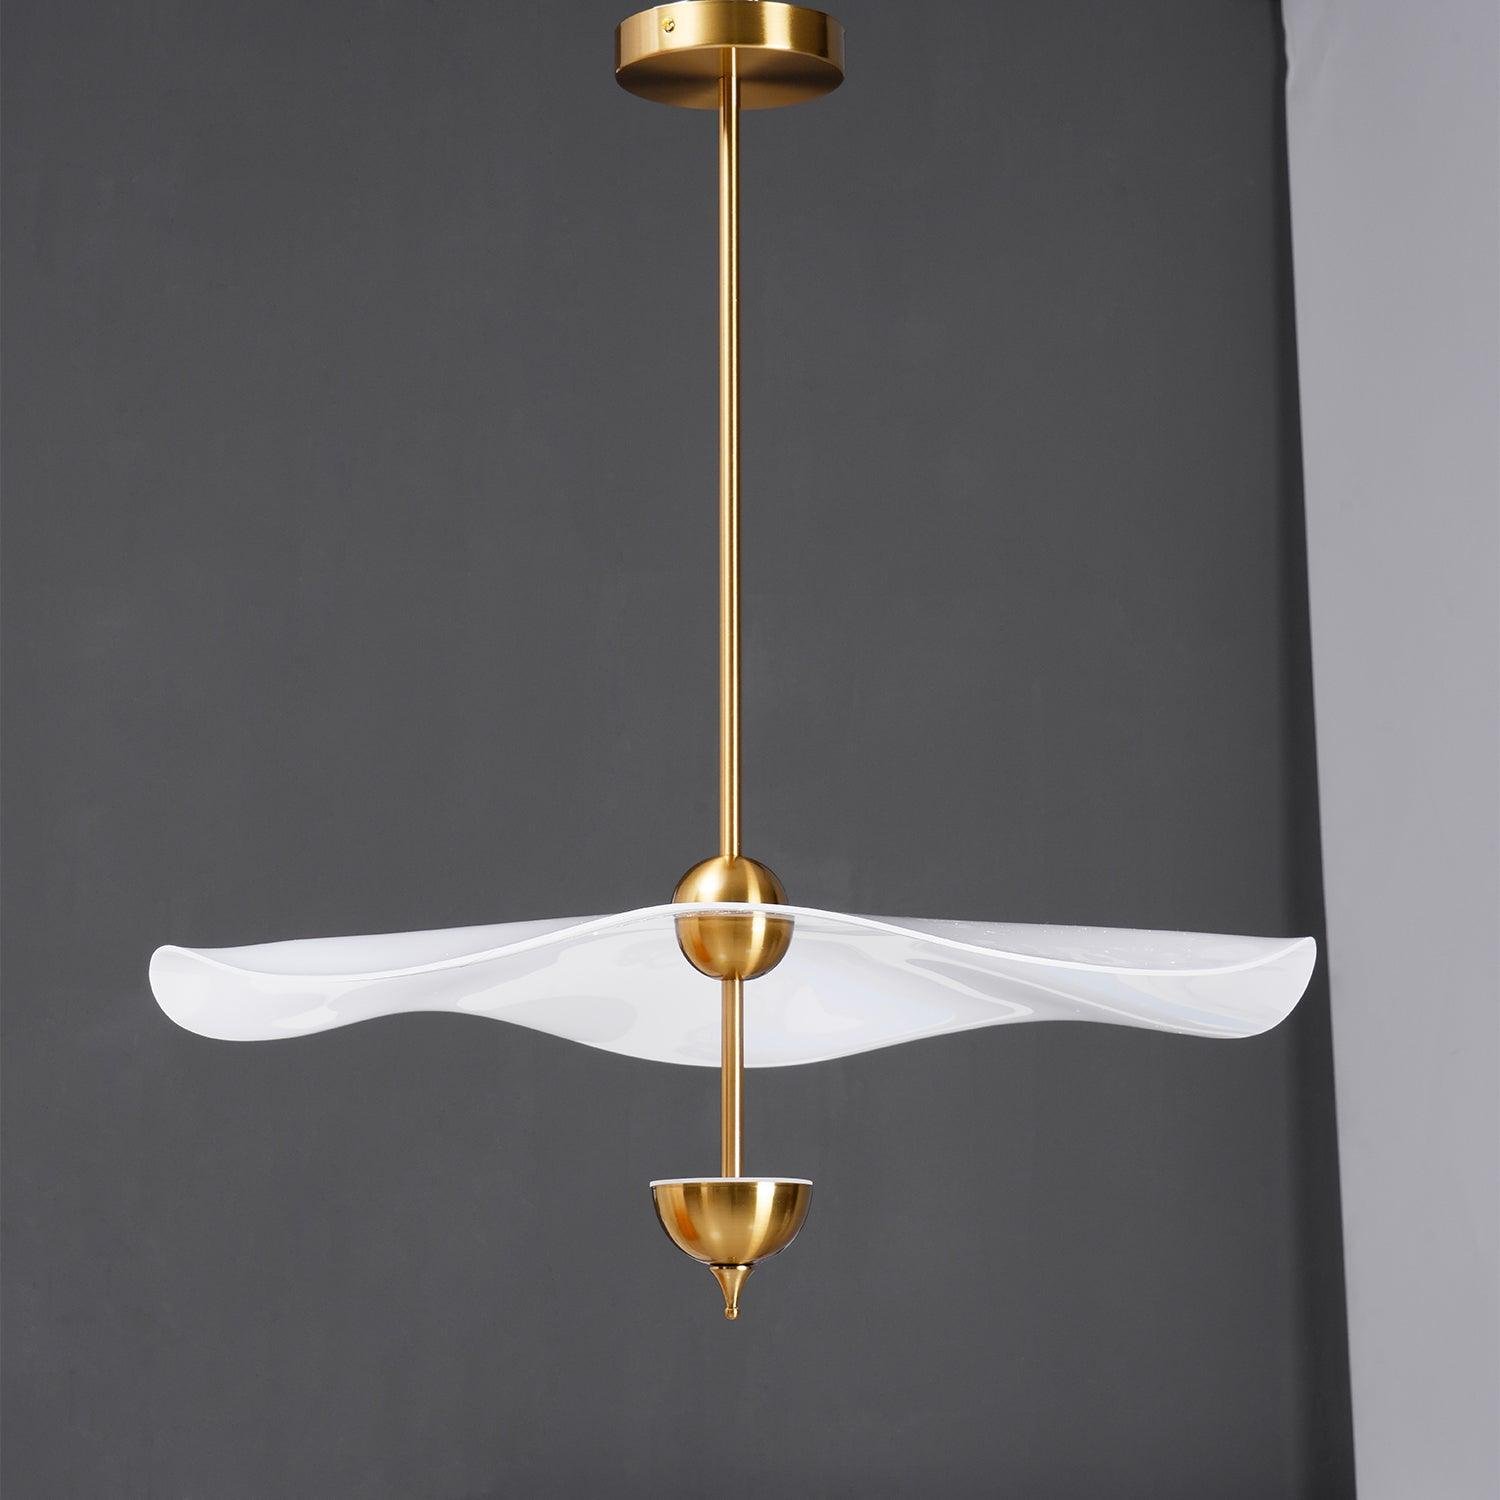 Envolee Double Biscuit Pendant Light, Gold Finish, with Cool White Lighting (Ø 23.6 inches x H 23.6 inches, 60cm x 60cm, 3300K to 5300K)